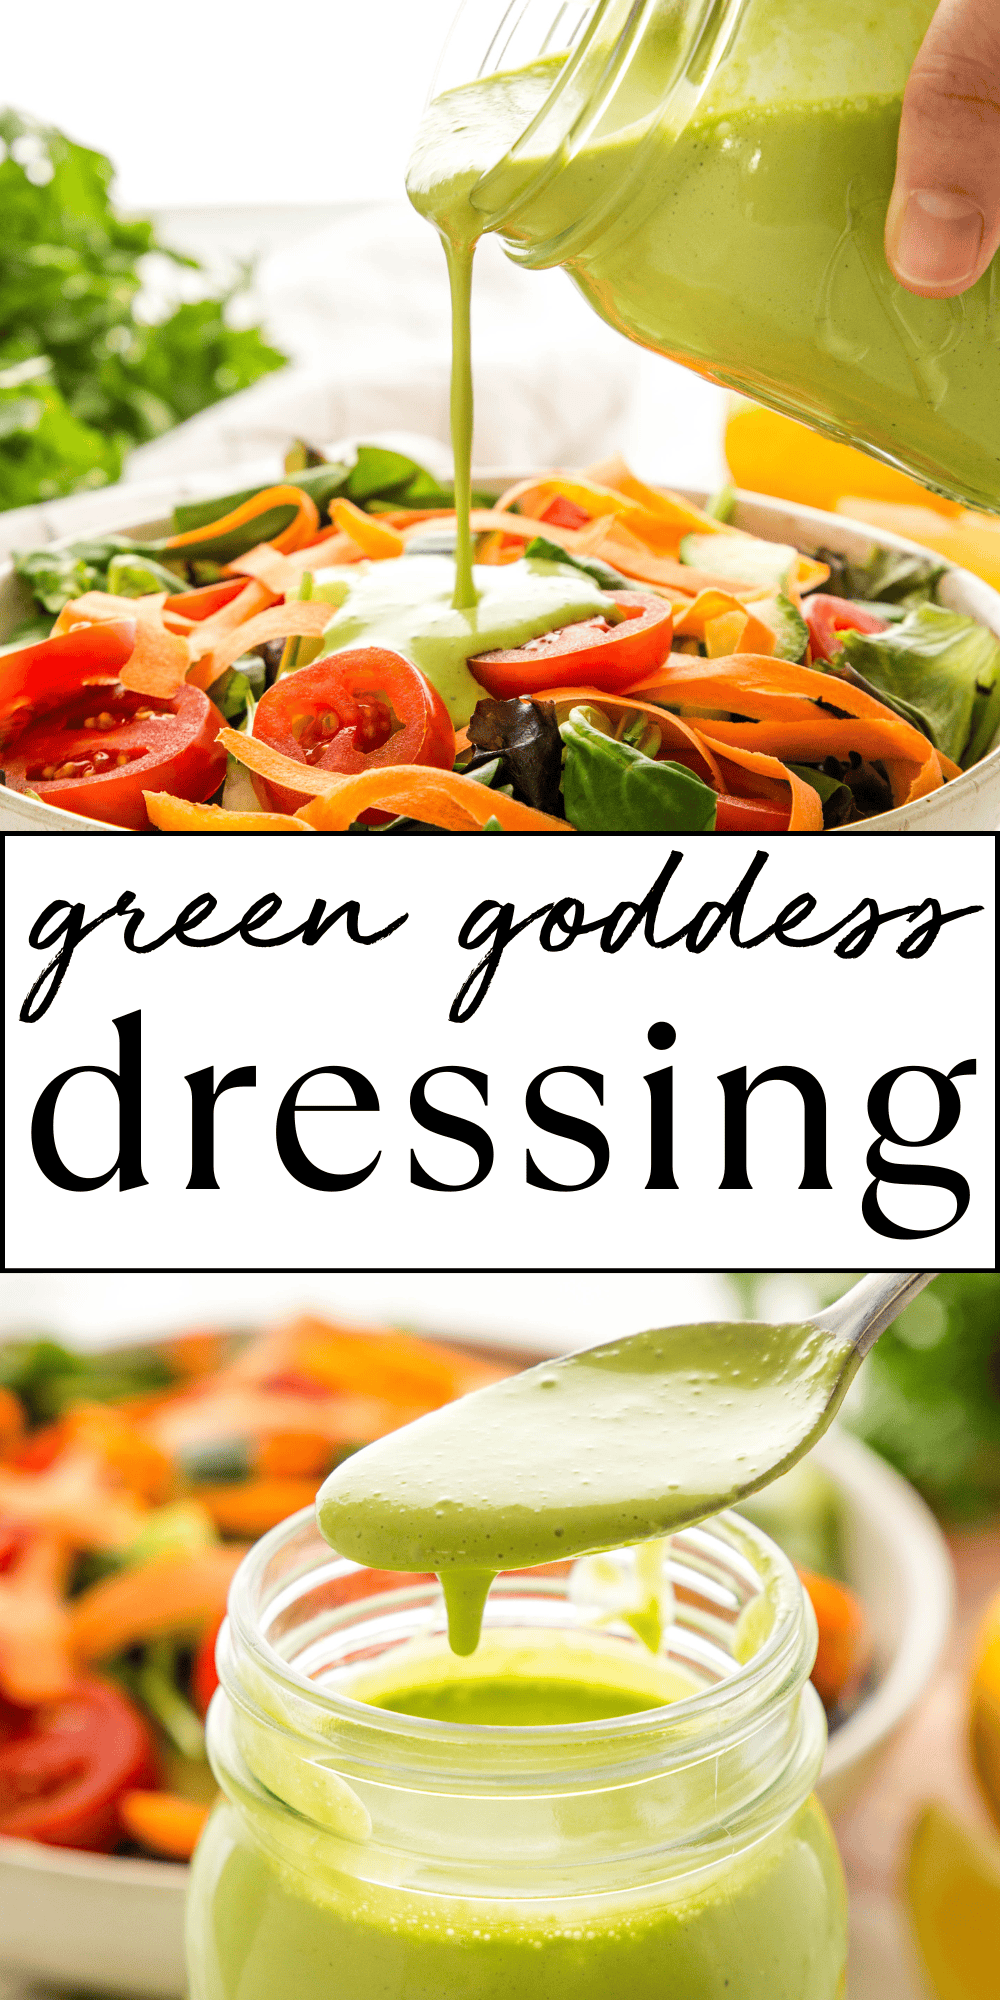 This Green Goddess Salad Dressing recipe is ultra creamy and smooth, made with fresh herbs and bursting with flavour. Perfect for salads or dipping! Recipe from thebusybaker.ca! #greengoddessdressing #greengoddesssaladdressing #saladdressing #homemadesaladdressing #homemade #healthy #lowfat #lowcarb #fresh #weightloss #creamy #easyrecipe via @busybakerblog